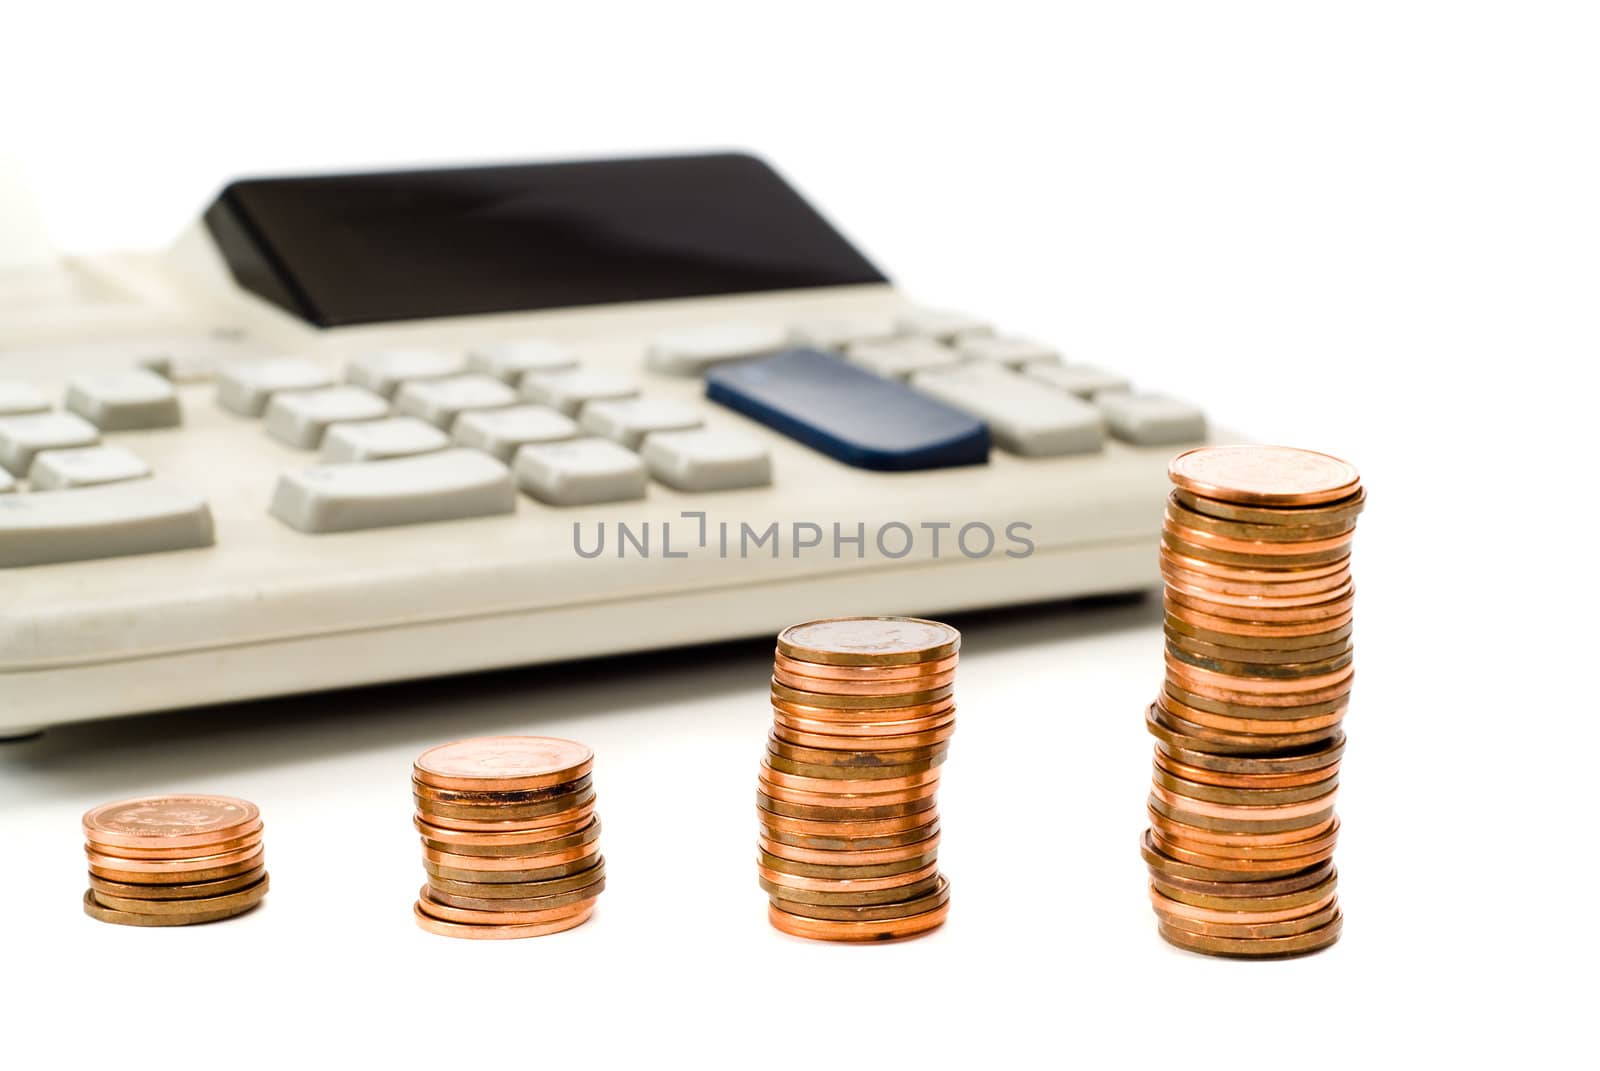 Concept image of government taxes using stacks of money and a calculator, shot against a white background